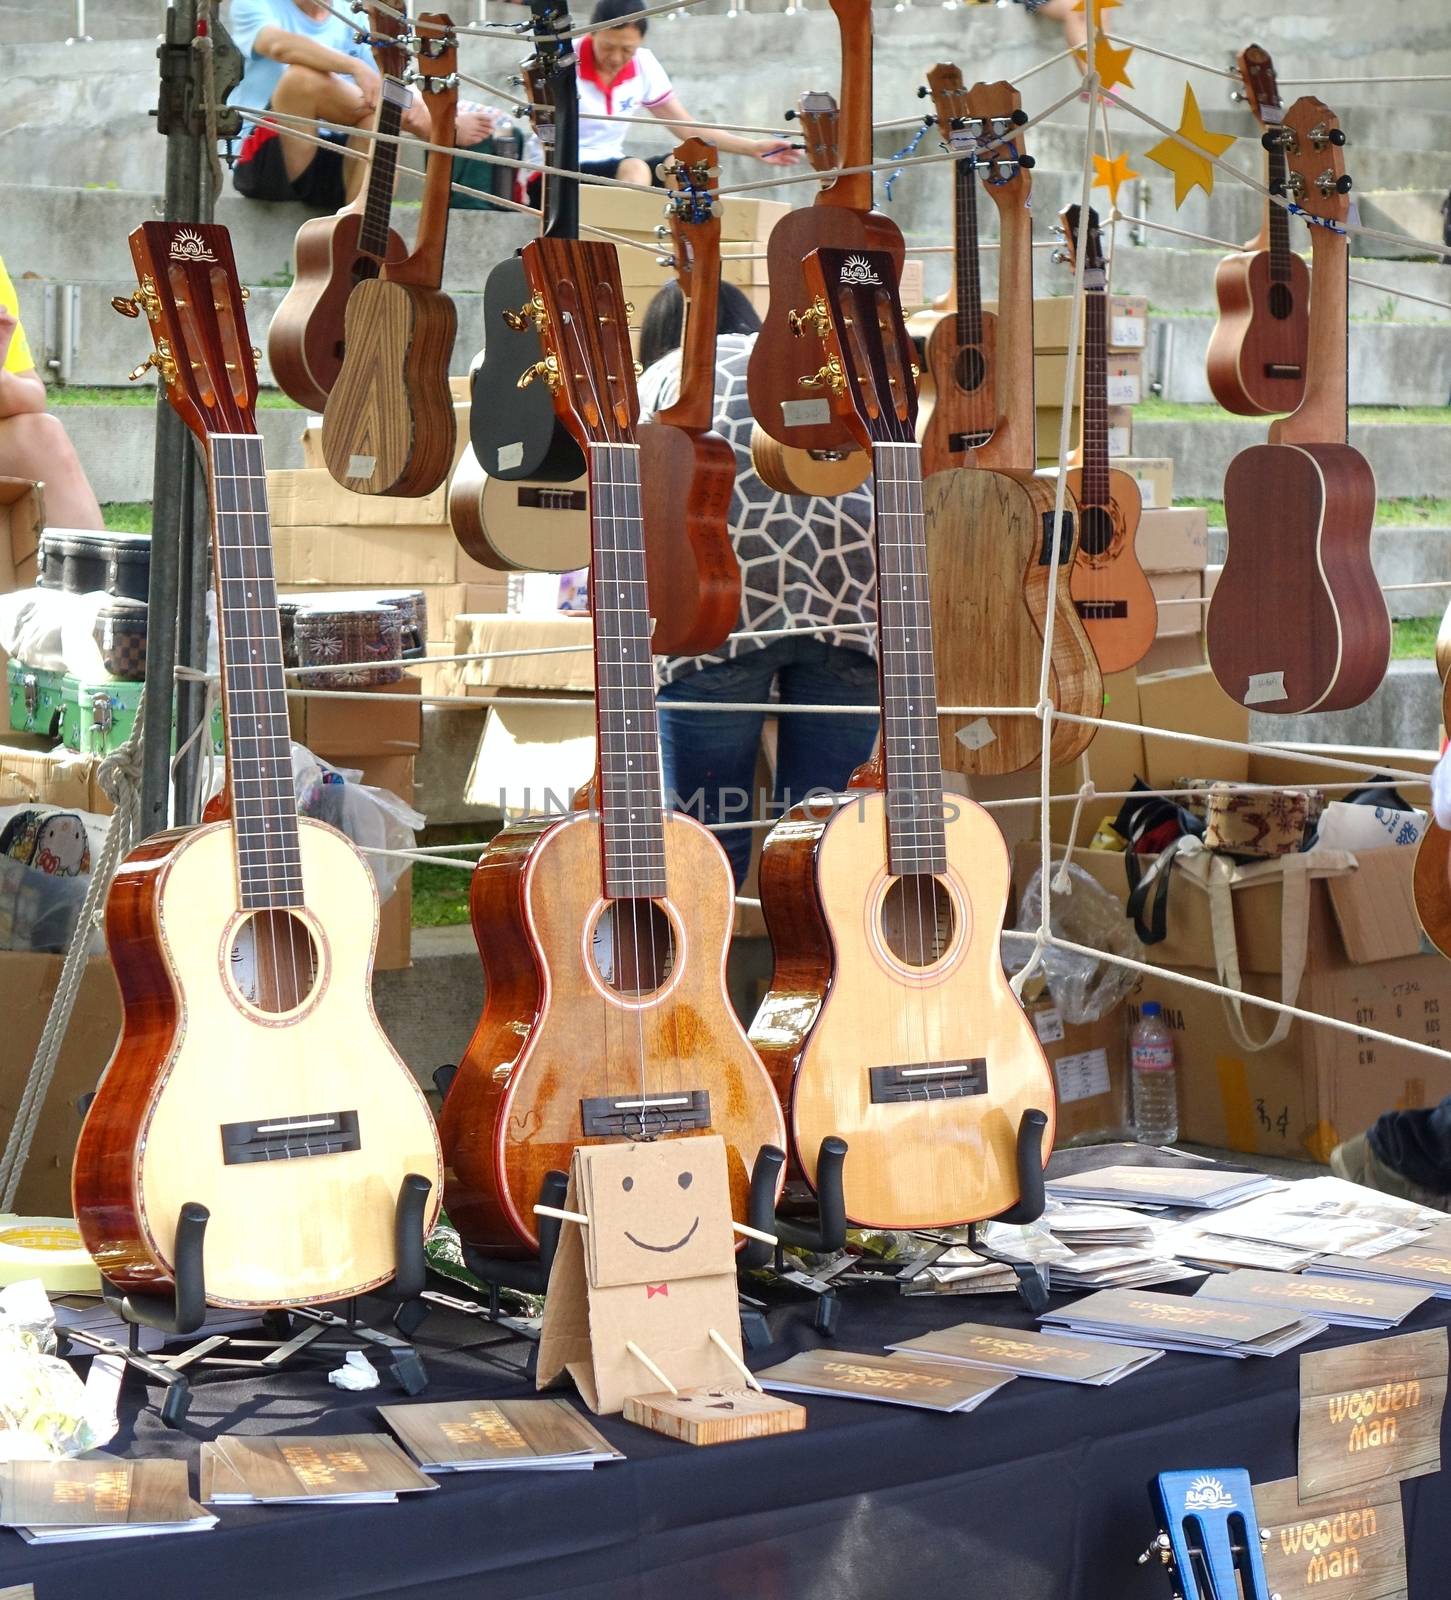 KAOHSIUNG, TAIWAN -- APRIL 23, 2016: Outdoor vendors sell musical string instruments at the 1st Pacific Rim Ukulele Festival, a free public outdoor event.